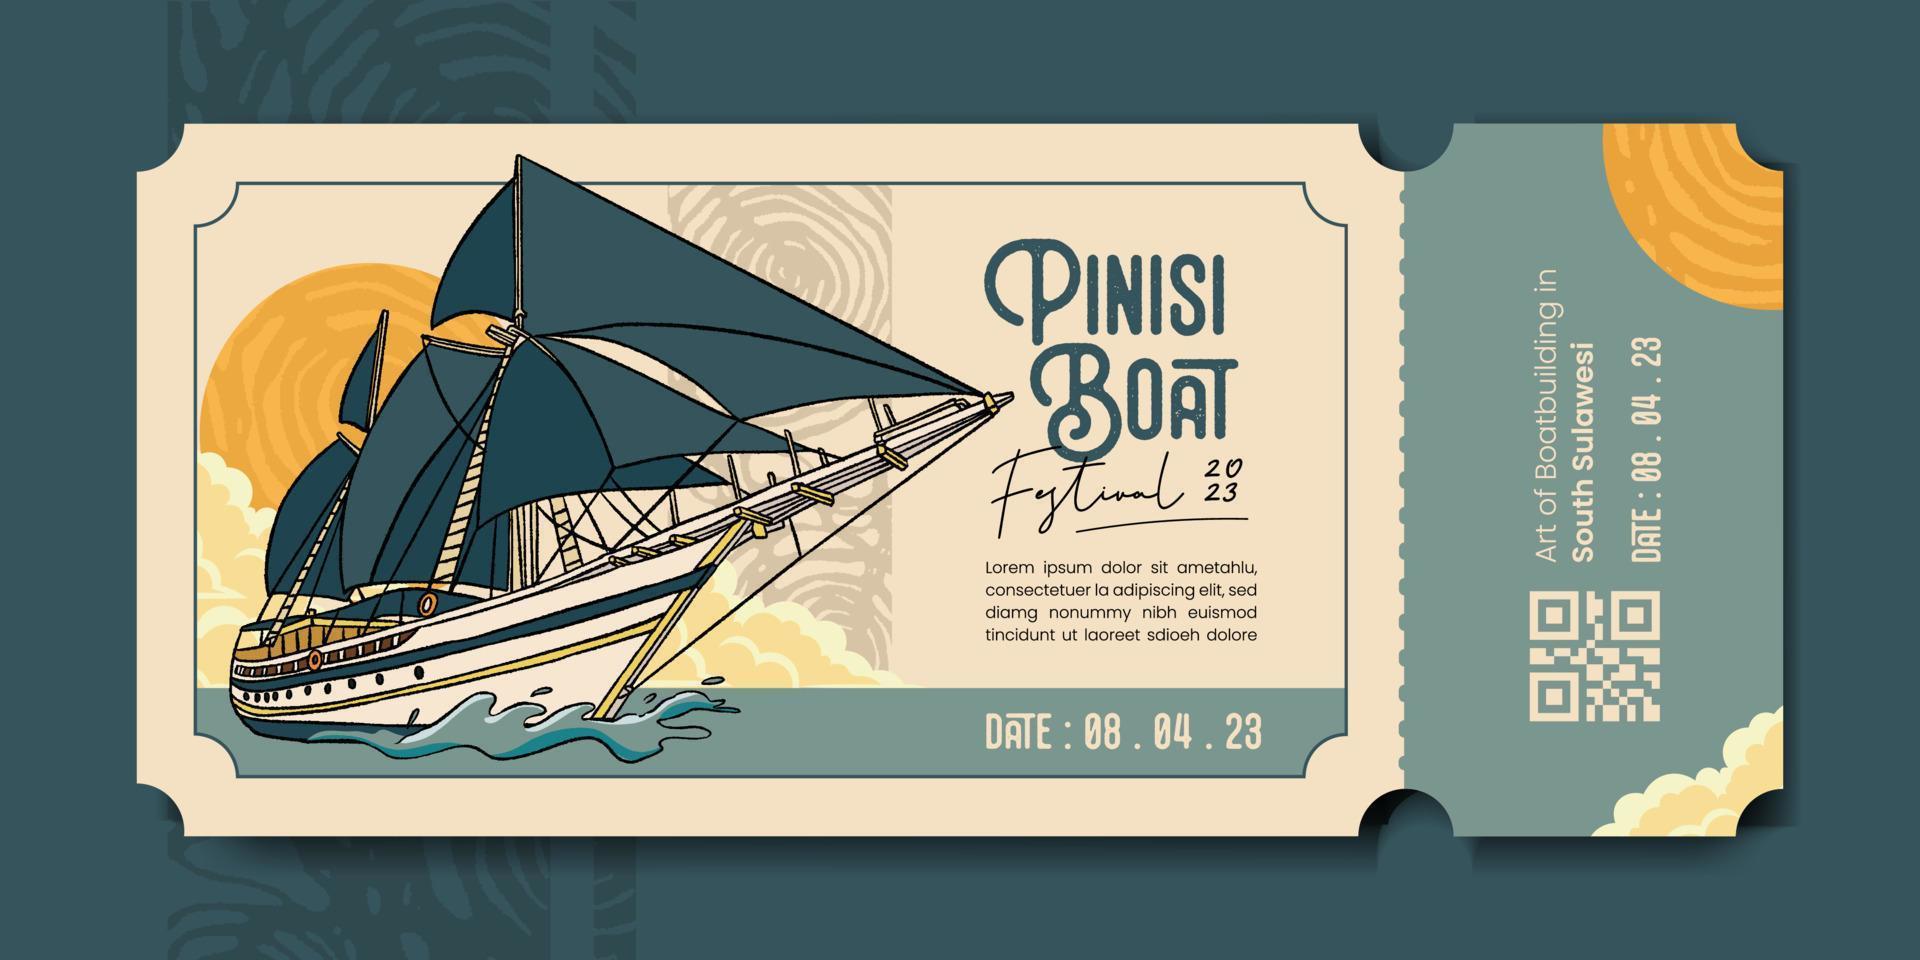 Transportation event voucher ticket with Pinisi Boat South Sulawesi hand drawn illustration vector